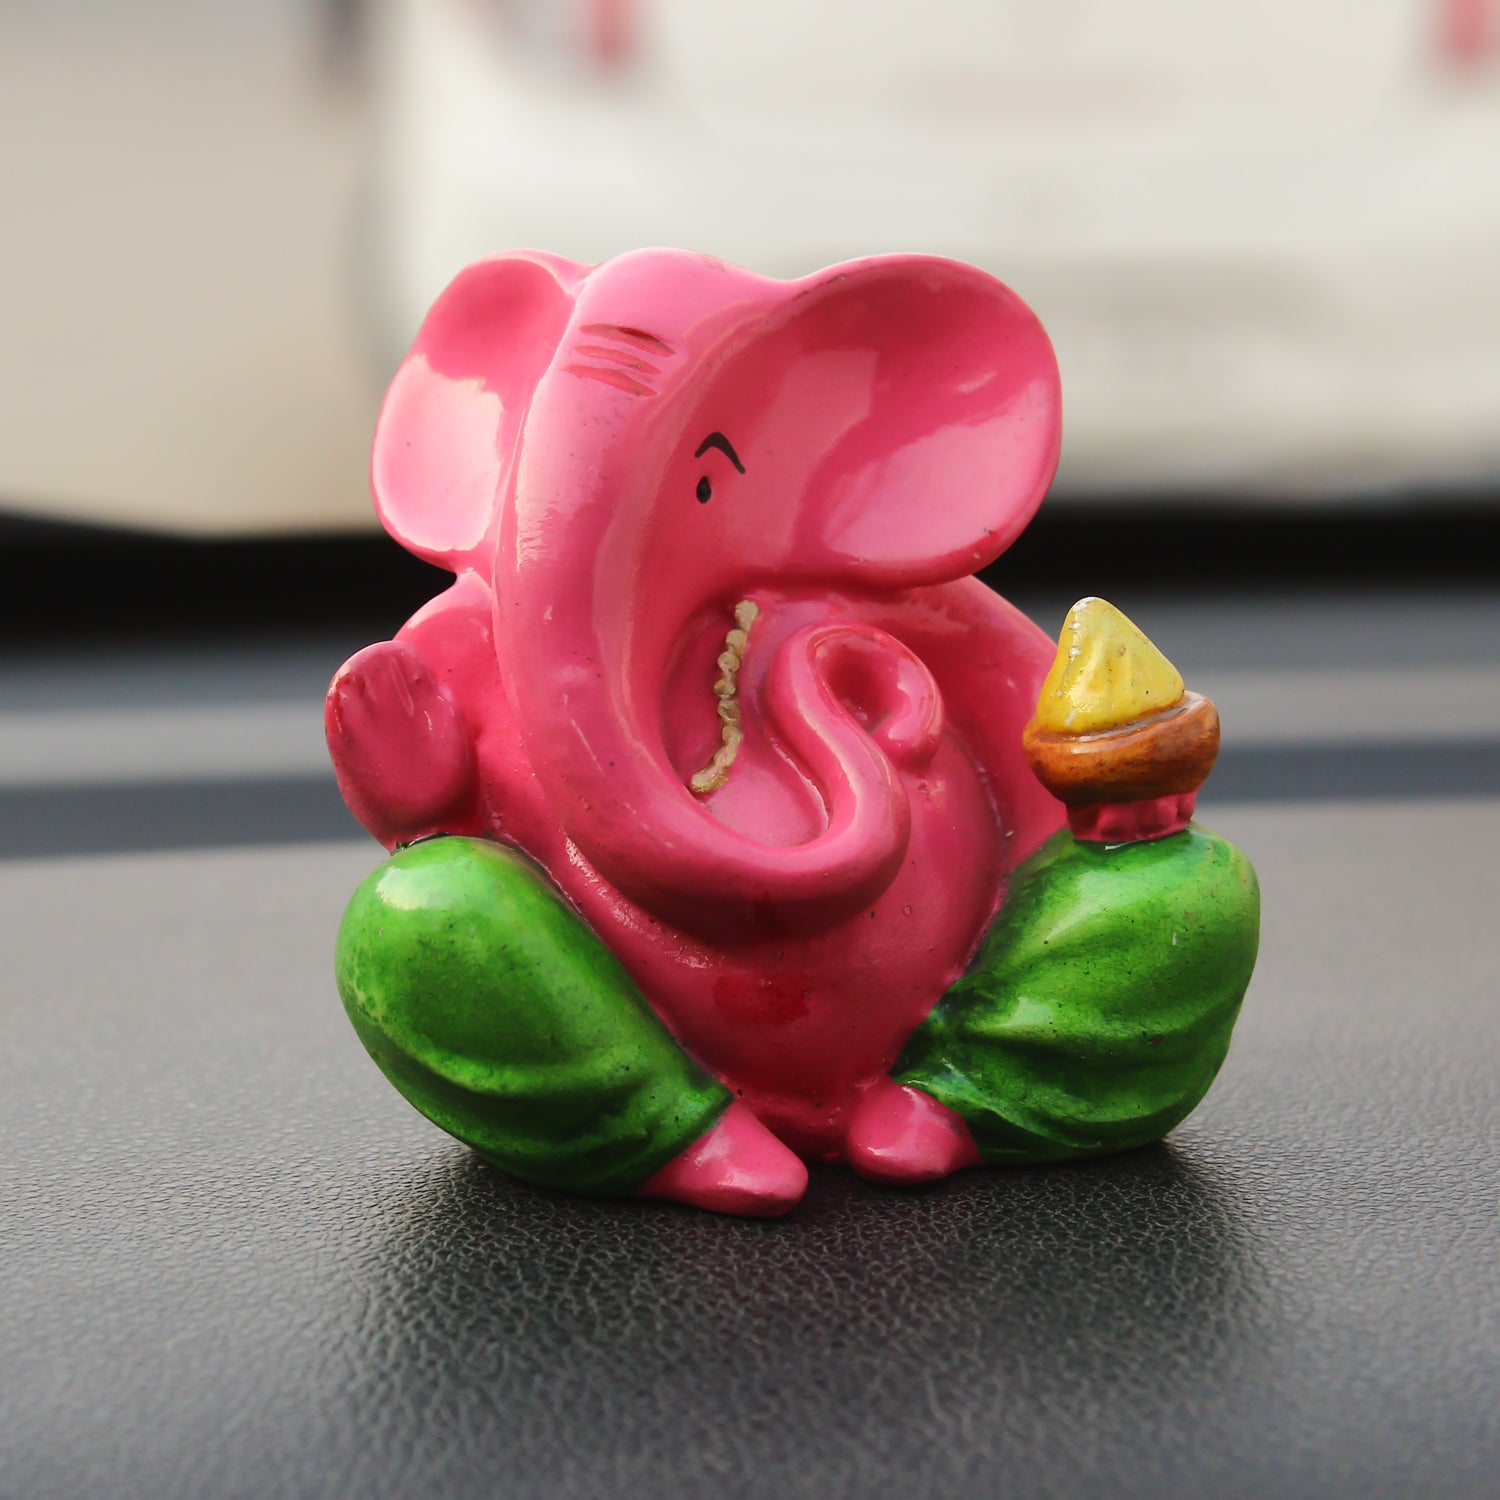 Pink and Green Polyresin Lord Ganesha Idol for Car Dashboard, Home Temple and Office Desks